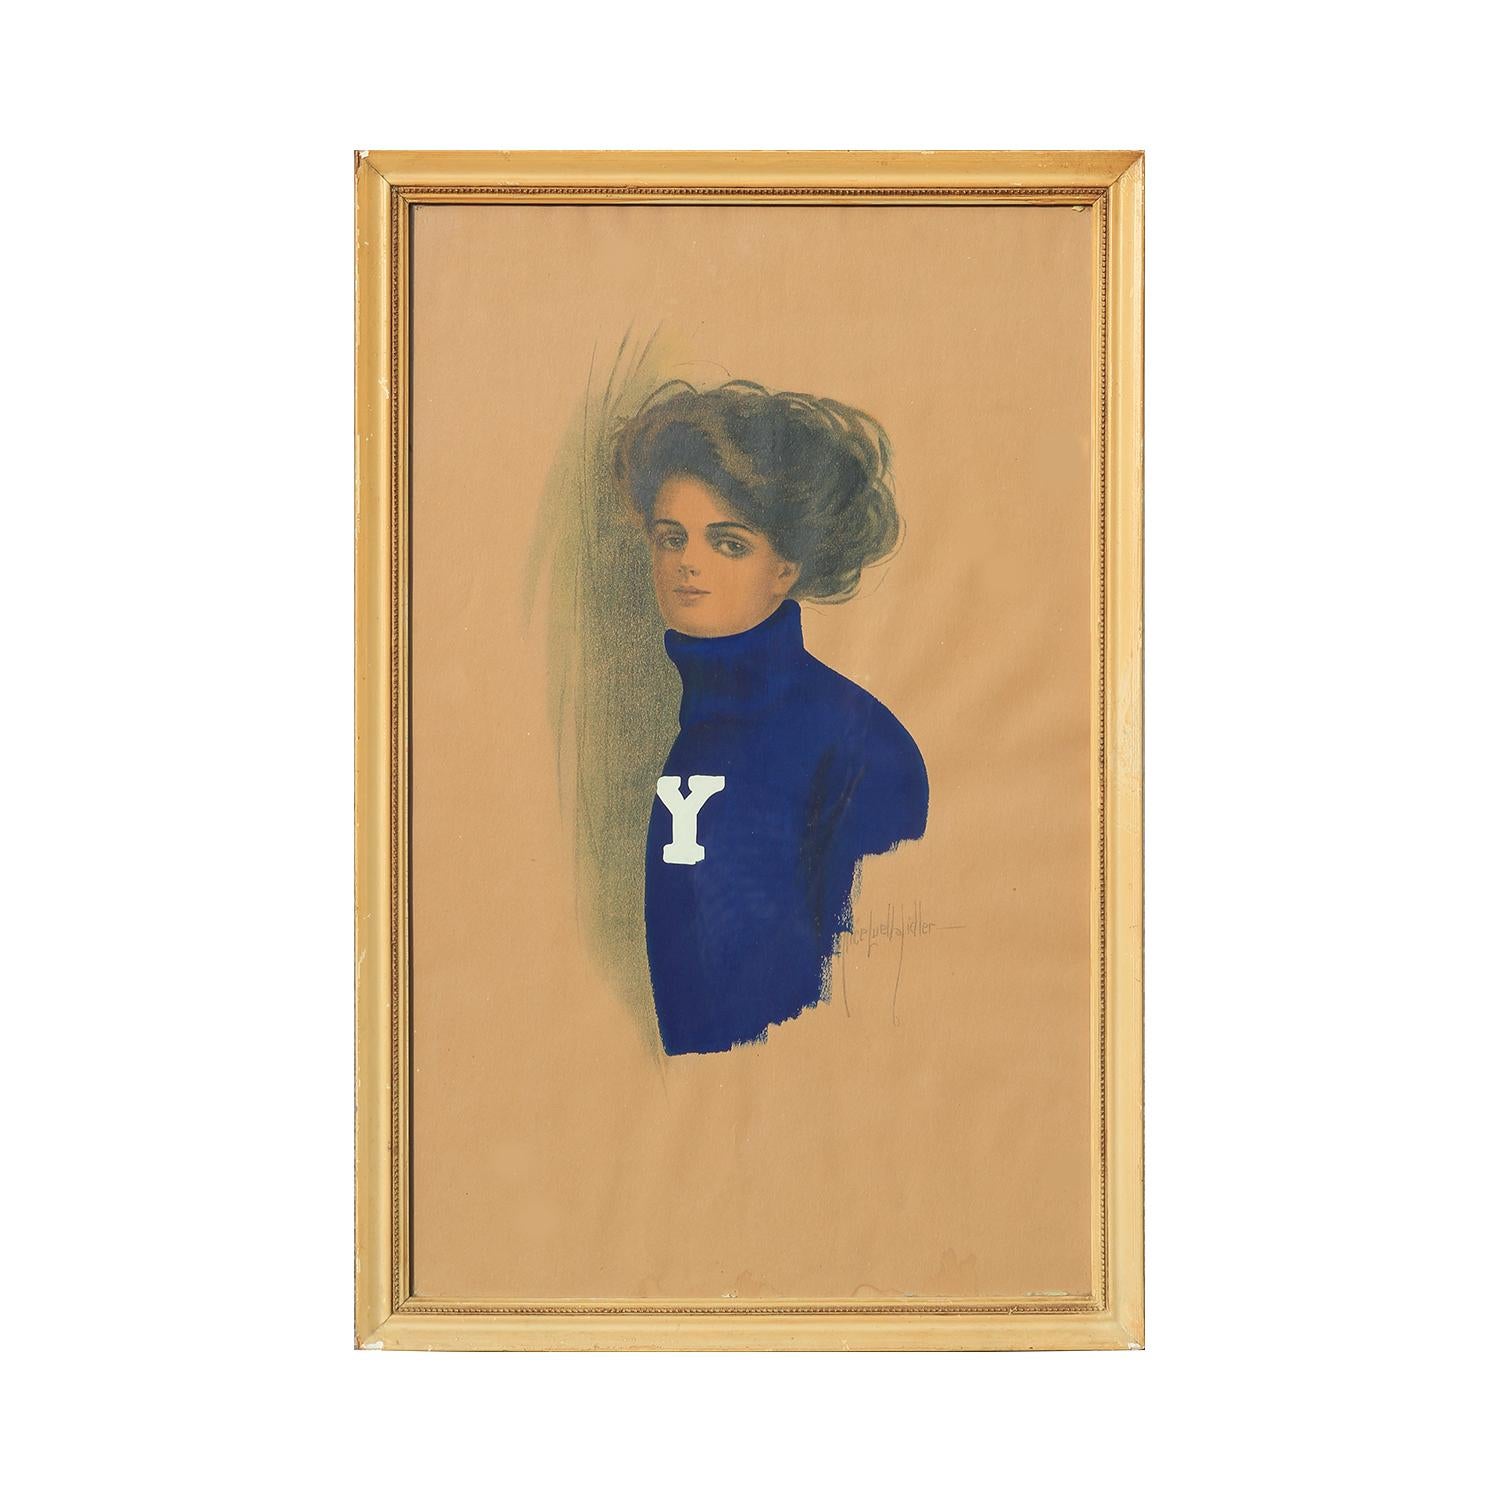 Early Hand Embellished Lithograph Portrait of a Yale Woman with a Blue Sweater - Painting by Alice Luella Fidler